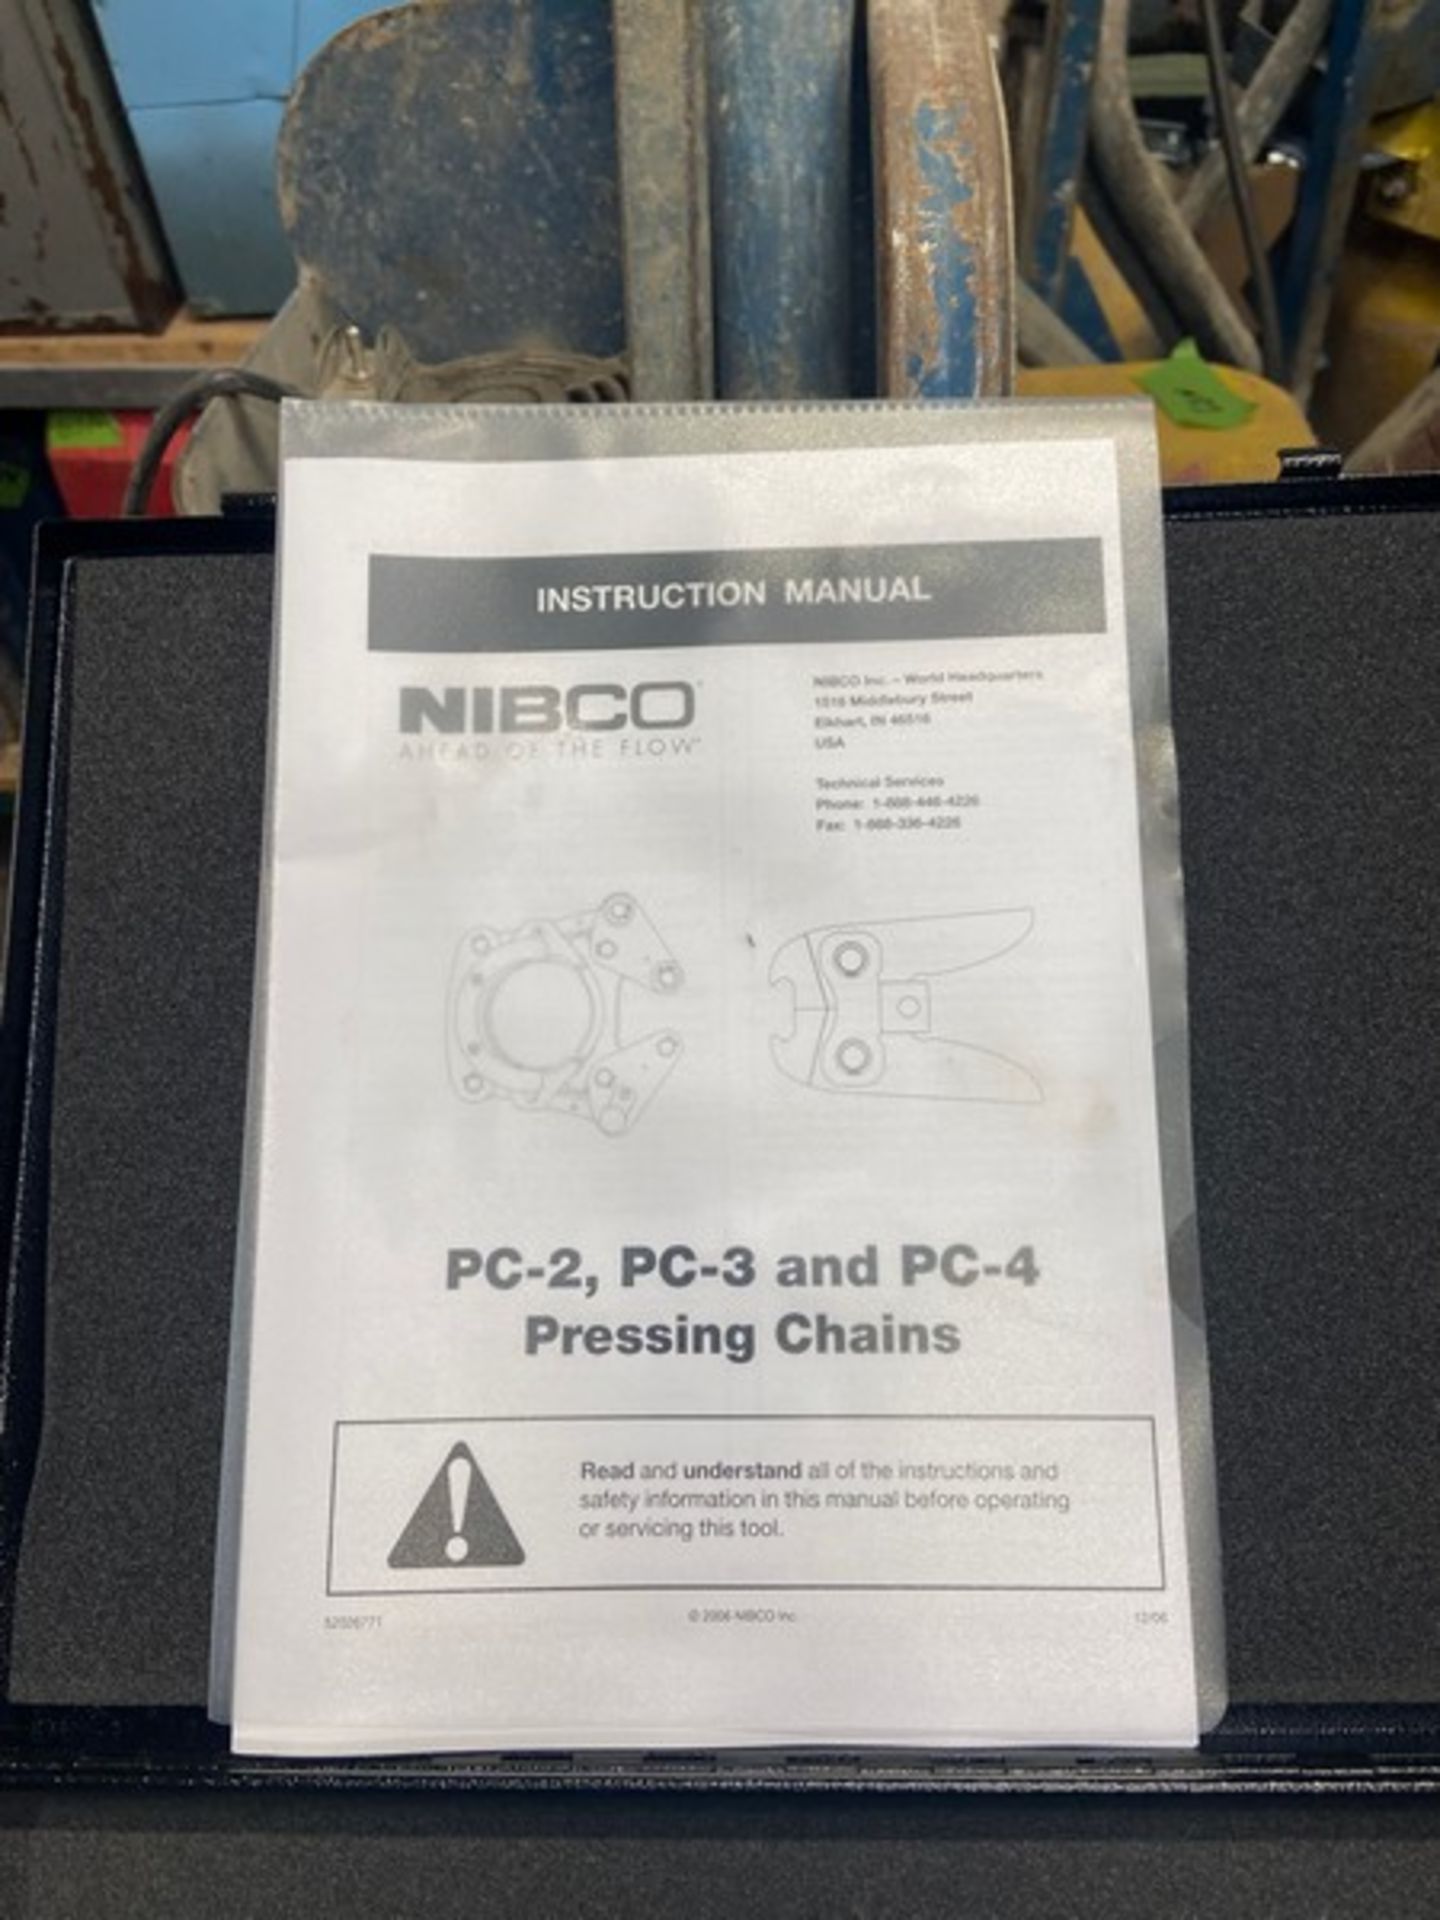 NIBCO 3” Pressing Chain, M/N PC-3, with Hard Case (LOCATED IN MONROEVILLE, PA) - Image 3 of 4